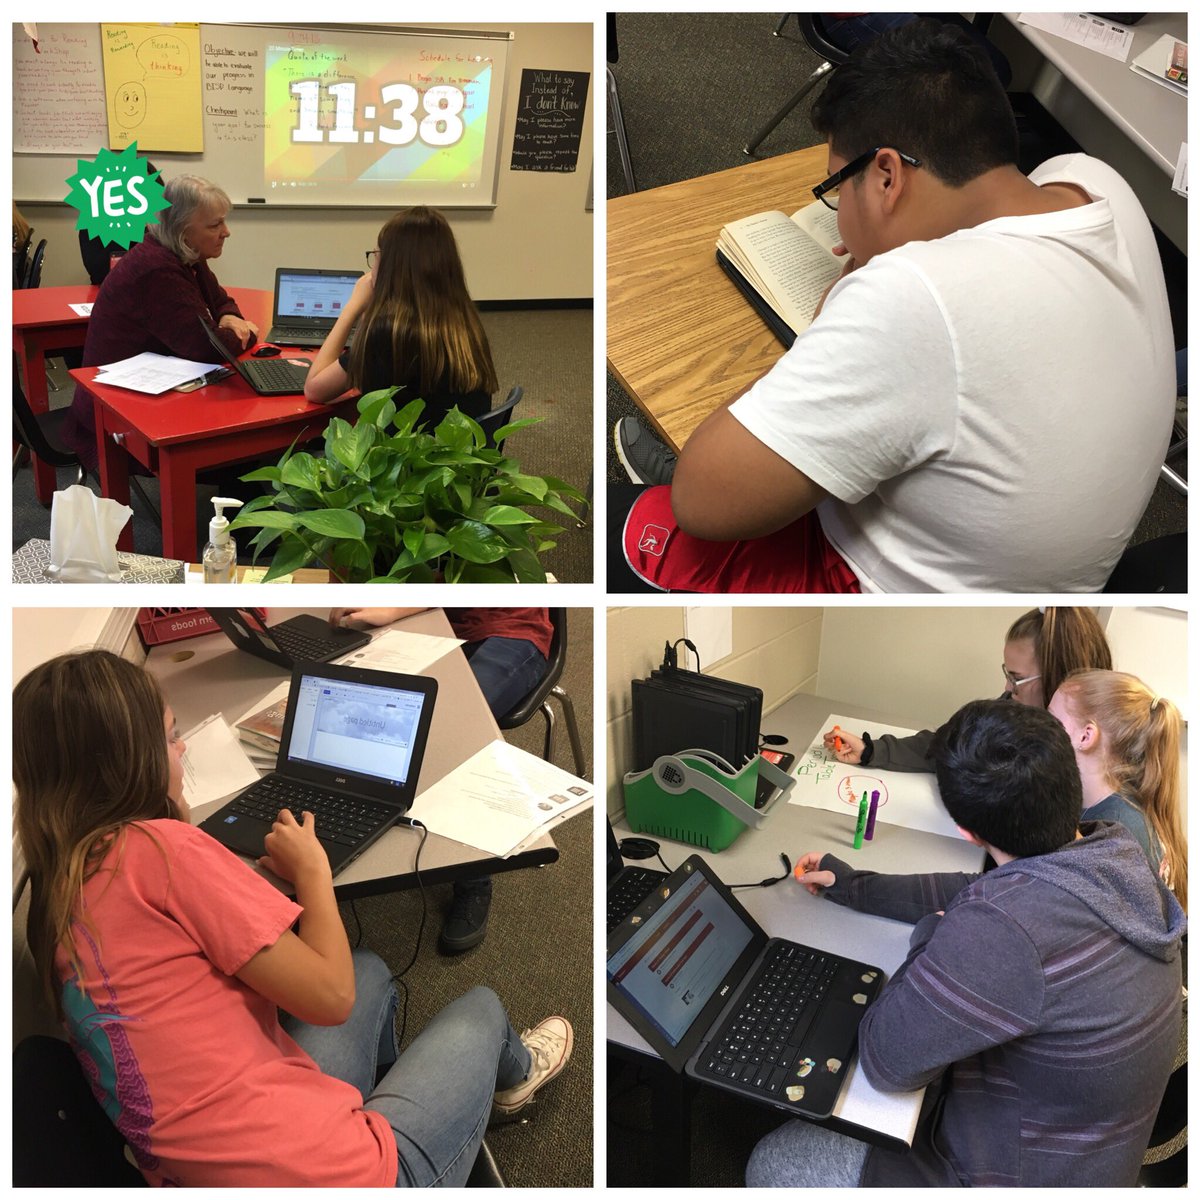 Lots of #BlendedLearning @LJIPanthers today! Ss are using #GoogleClassroom and #Sites, enjoying #SSR and getting #RealTimeFeedback in #StationRotation today! #BISDpride #digitalBISD @btechieMerritt @VictoriaHecken1